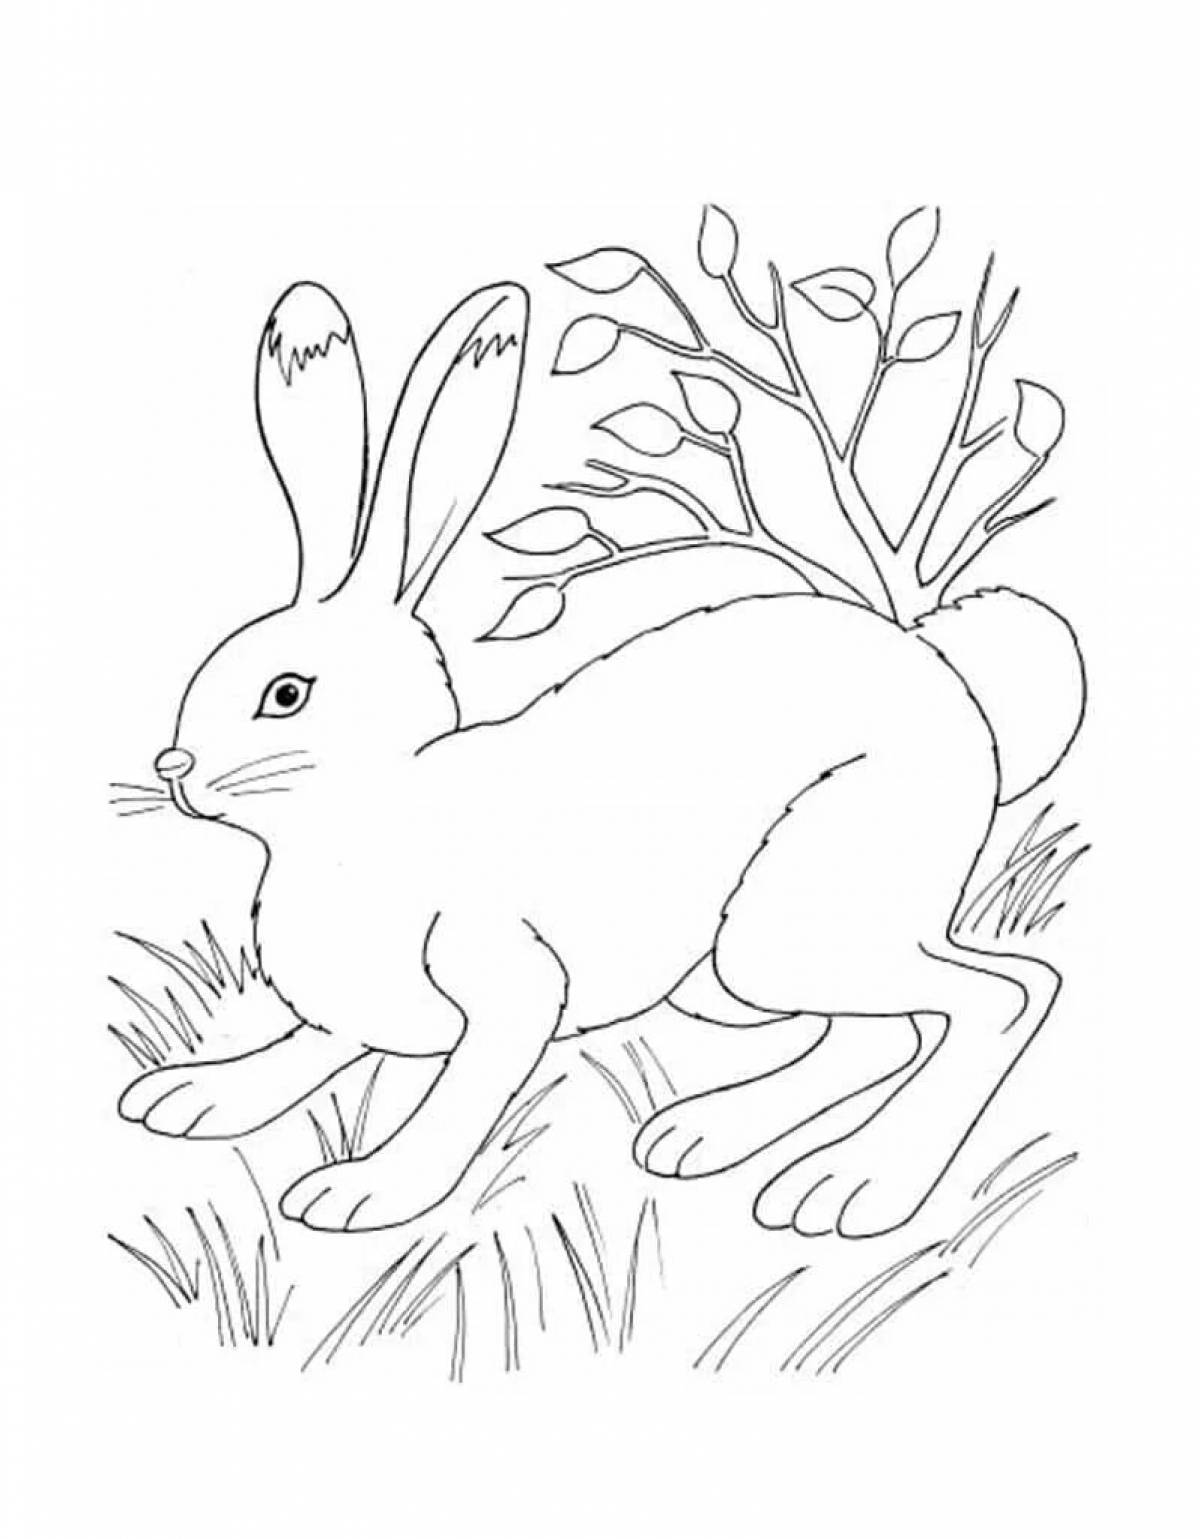 Bunny in the forest #5